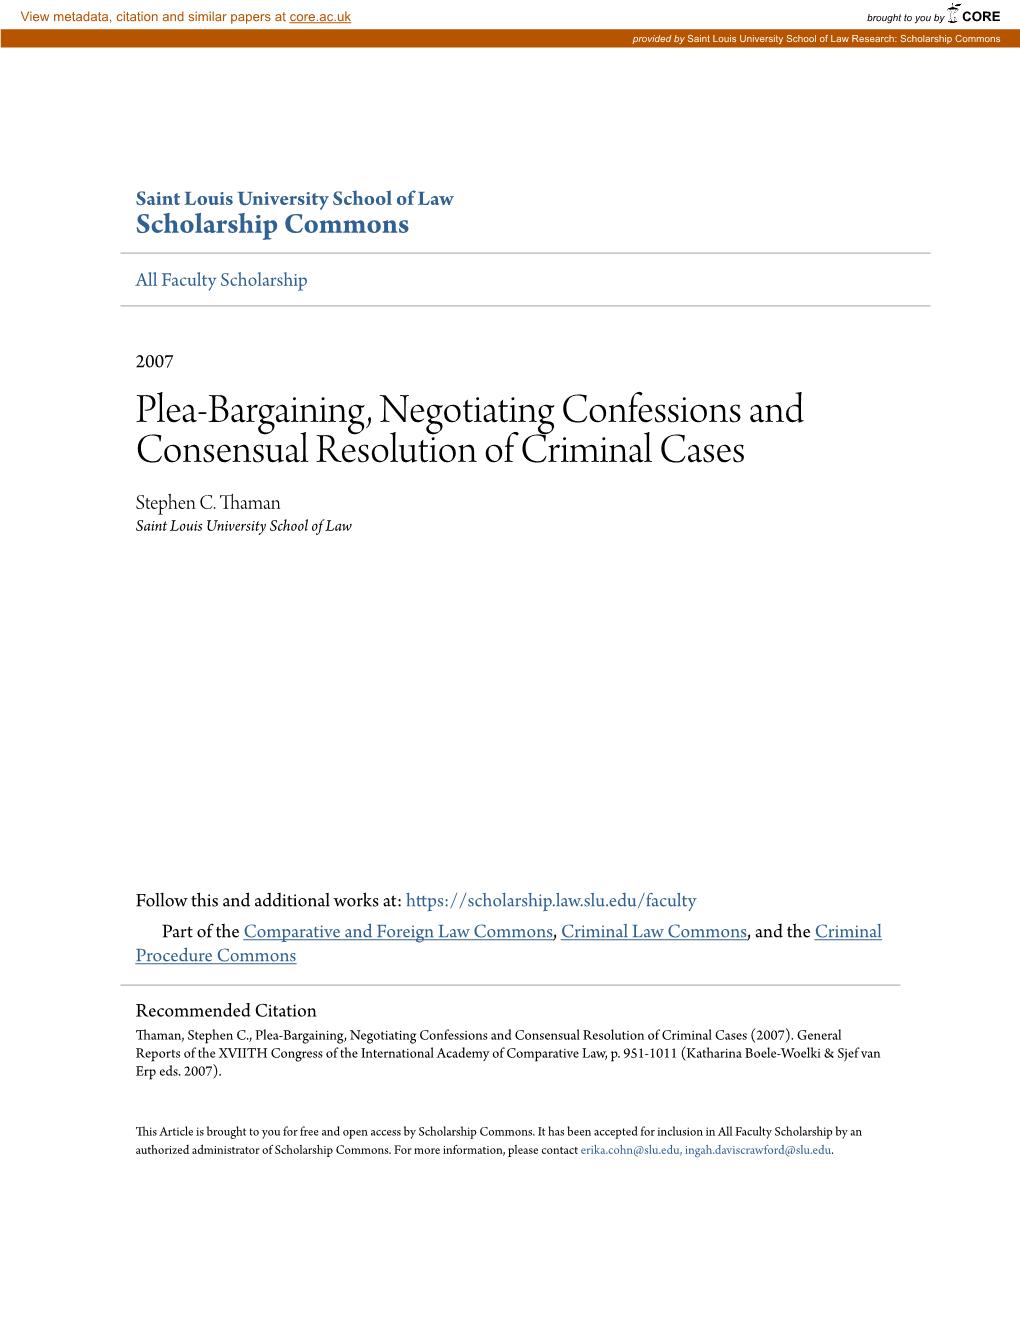 Plea-Bargaining, Negotiating Confessions and Consensual Resolution of Criminal Cases Stephen C